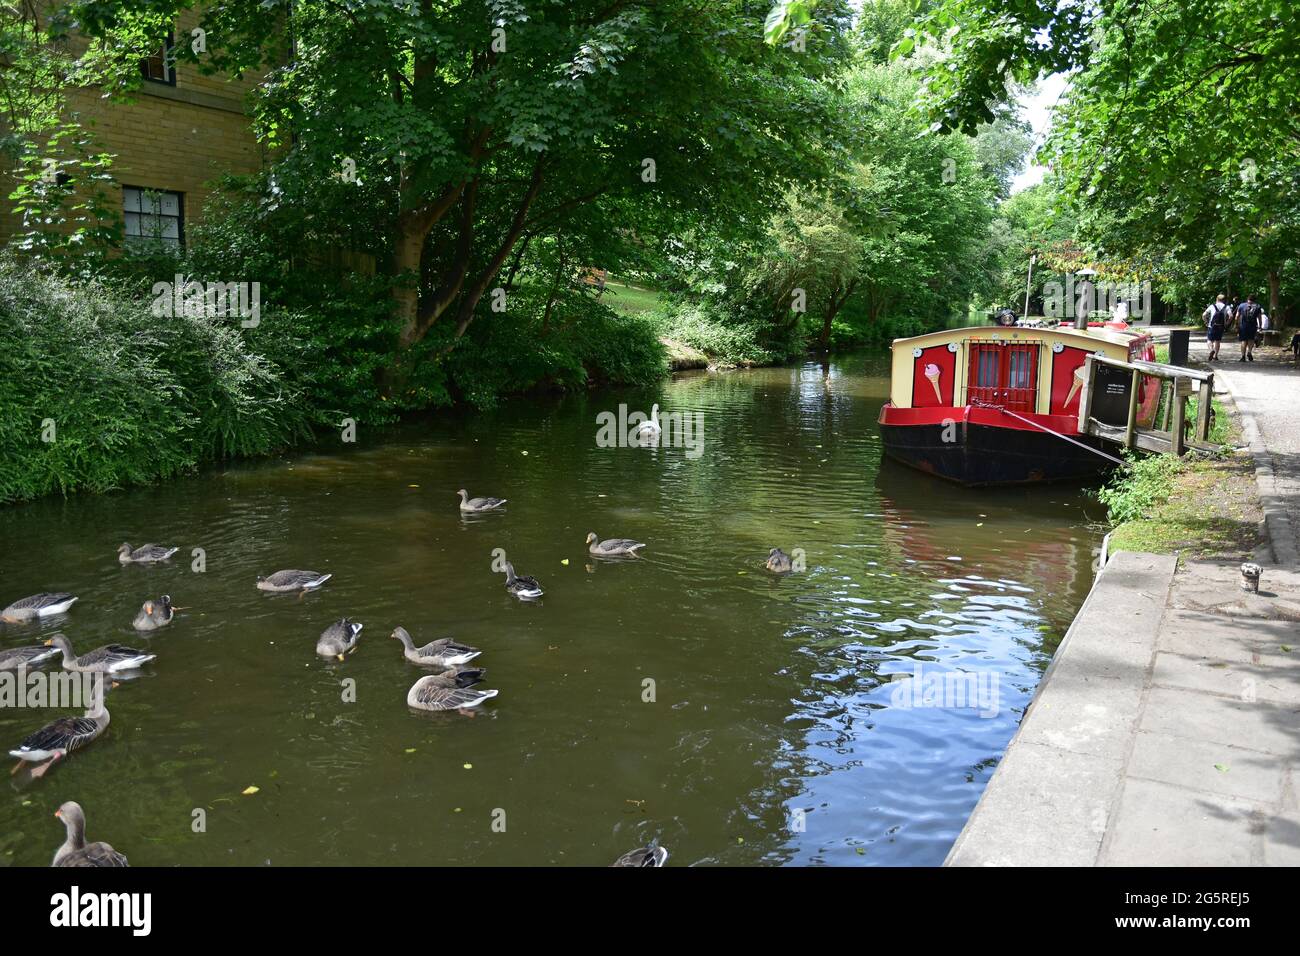 Canal boat and tourists, the canal, Saltaire, Shipley, West Yorkshire Stock Photo